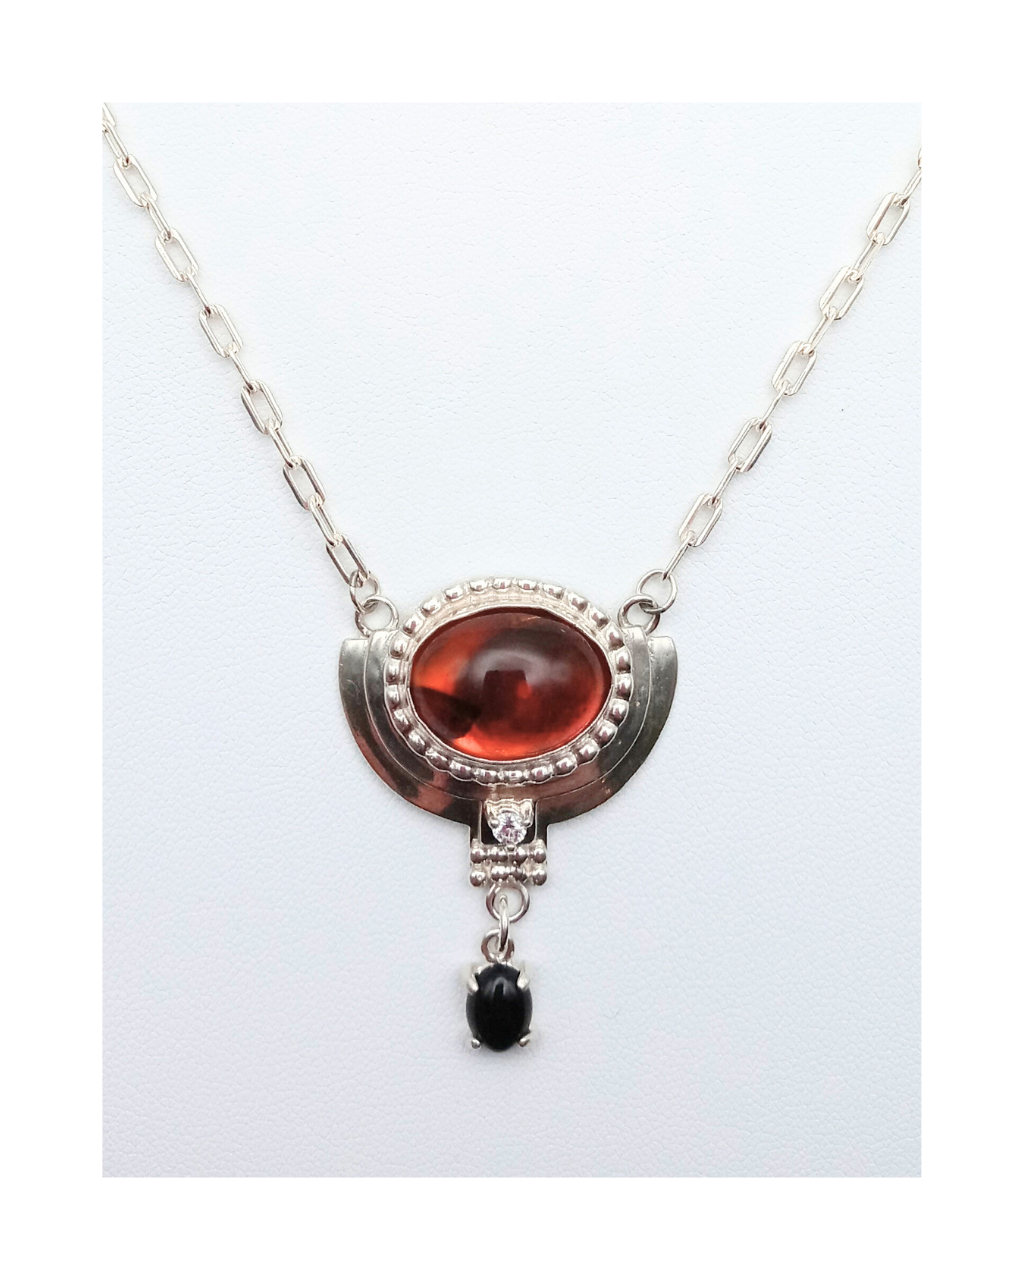 Sterling 925 Honey Amber, Black Onyx, and Sparkling Cubic Zirconia Necklace and Earring Set. ONE ONLY.